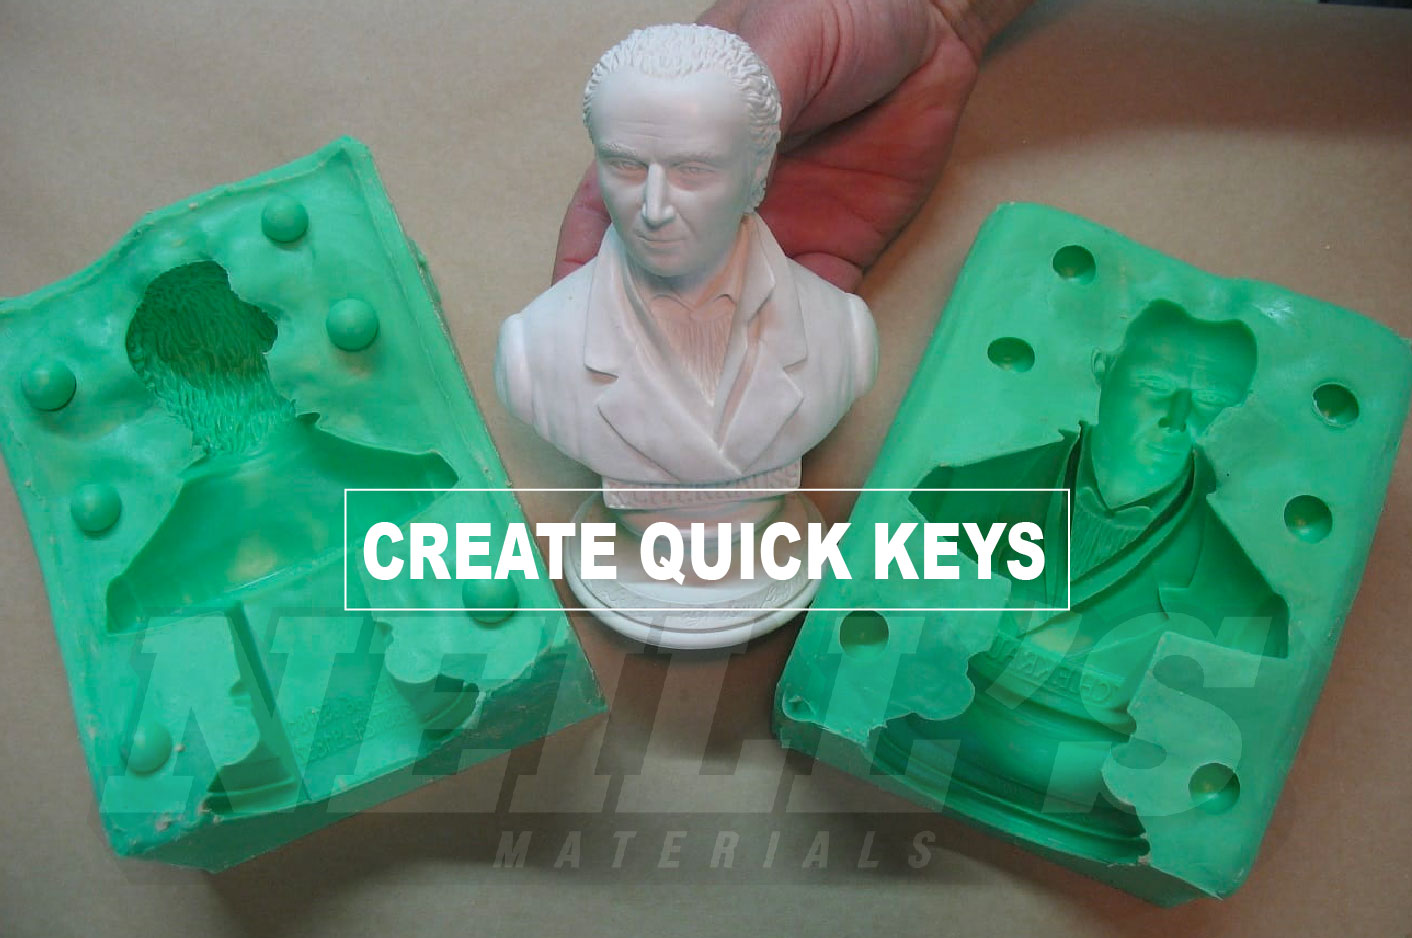 What Can I Use To Make Keys In My Two-Part Mould? - Neills Materials